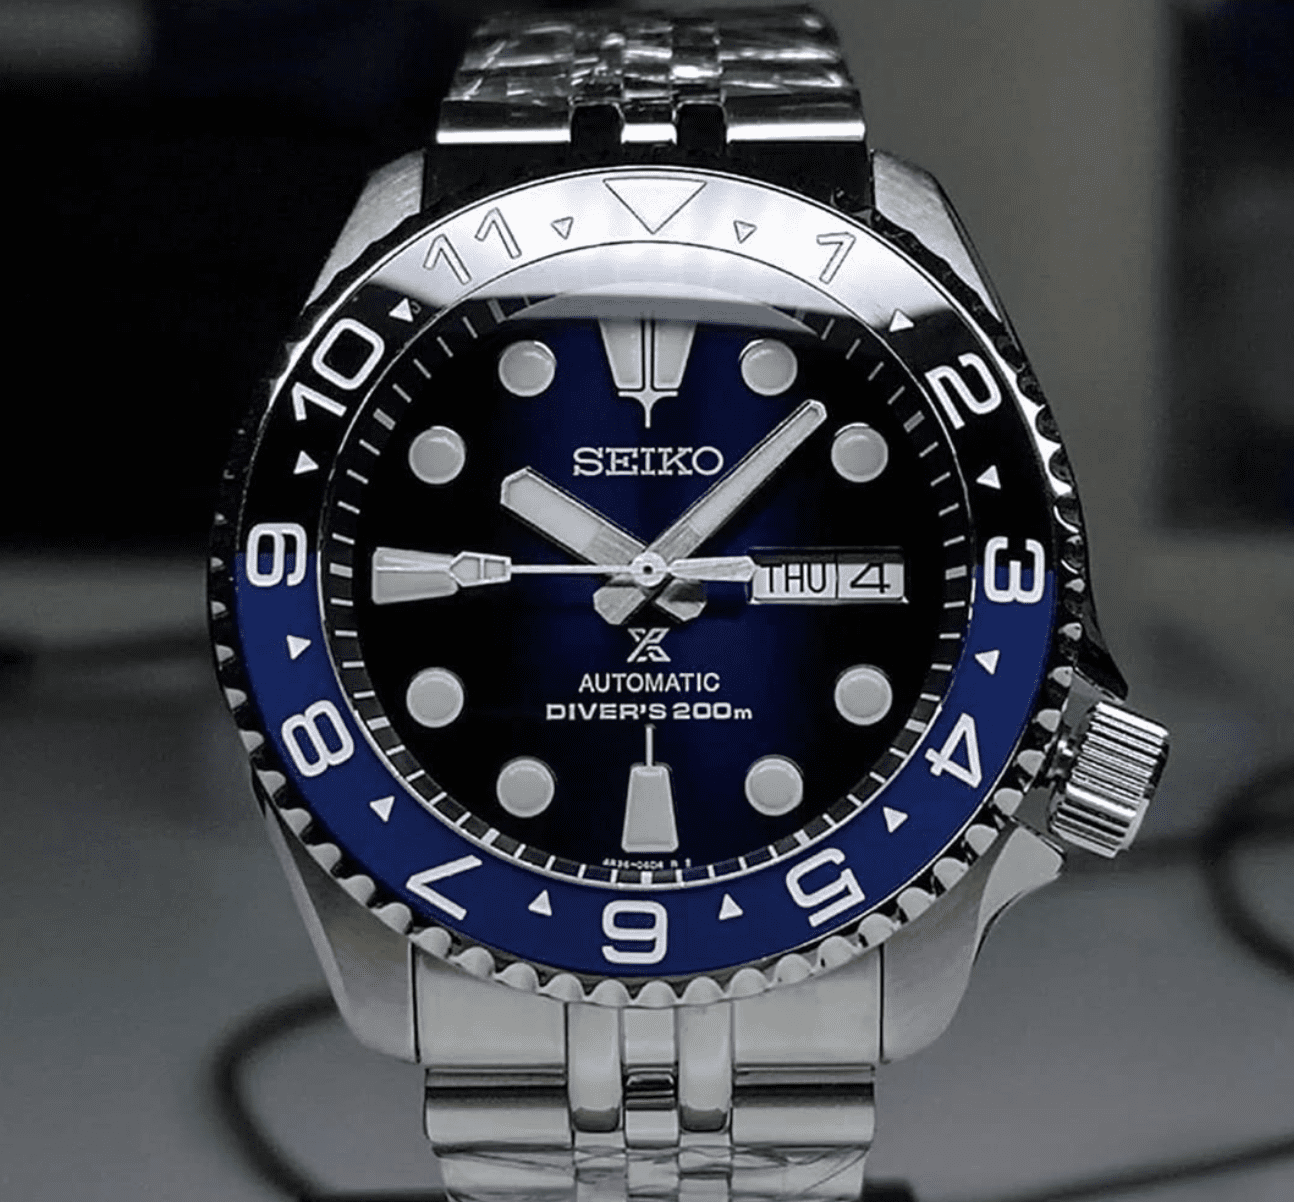 Seiko Mod Wrist Watch With A Blue Dial, White Markers And Red Accents,  Homage To Rolex Submariner Or Omega Seamaster Stock Photo Alamy |  